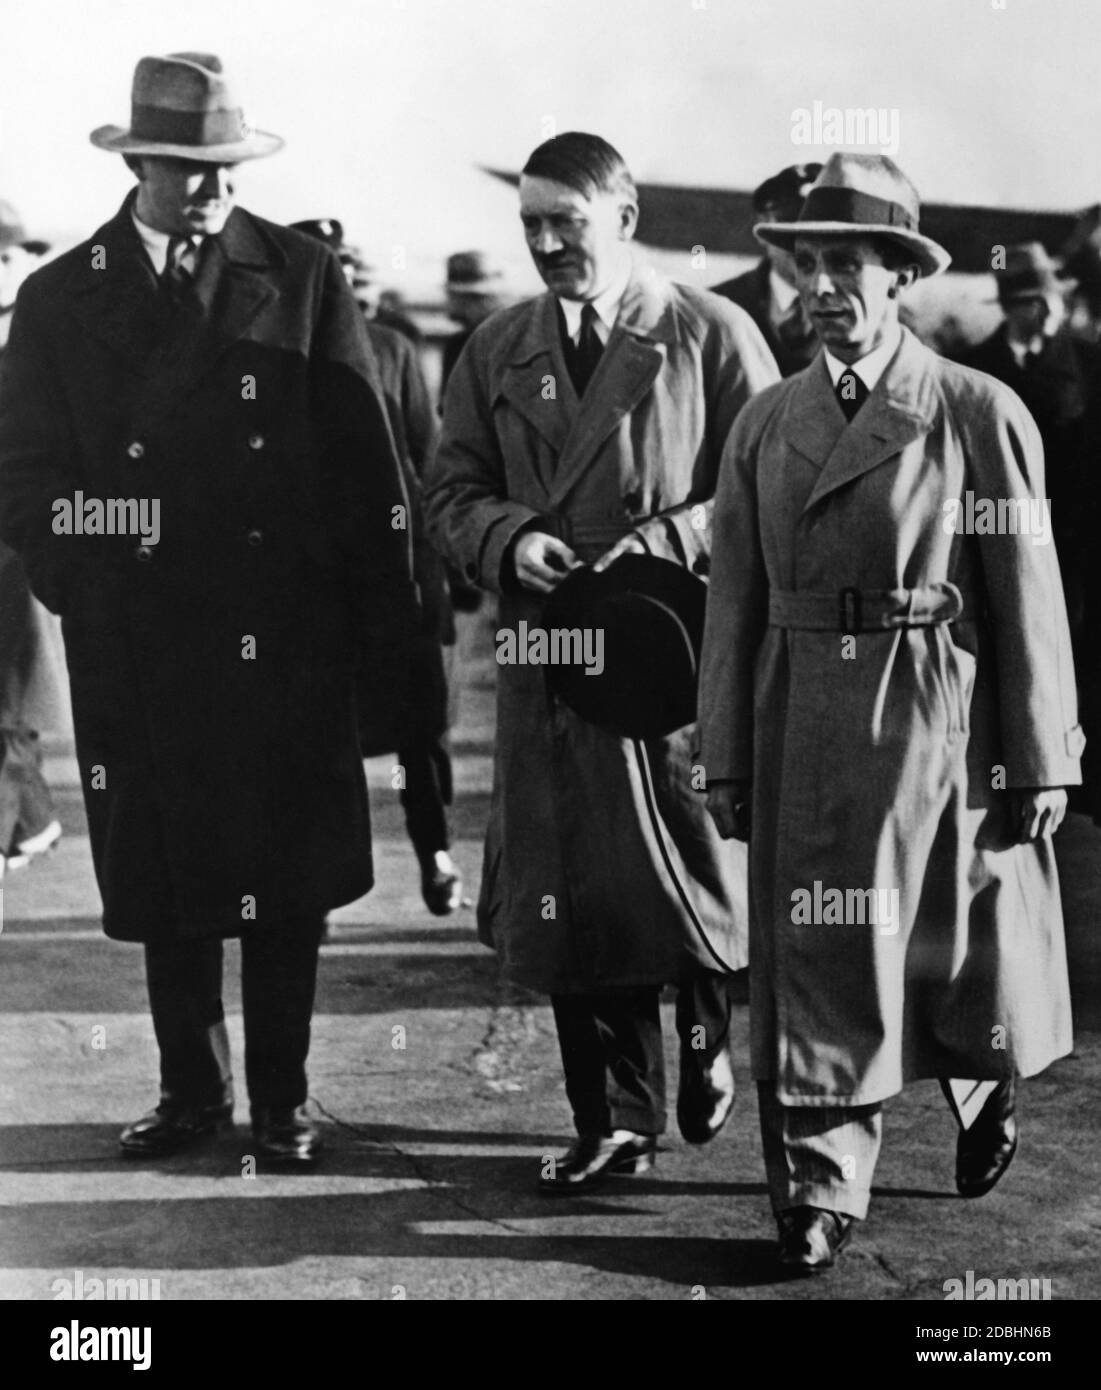 Adolf Hitler is greeted by Paul von Hindenburg at the Tempelhofer Feld in Berlin. Dr. Joseph Goebbels is walking beside Hitler. In this period Hitler always carried a dog whip with him as an accessory. He and Goebbels wore the trench coat, which Hitler introduced as a garment and tried to distance himself from the dress style of the Weimar politicians with the help of this. Stock Photo